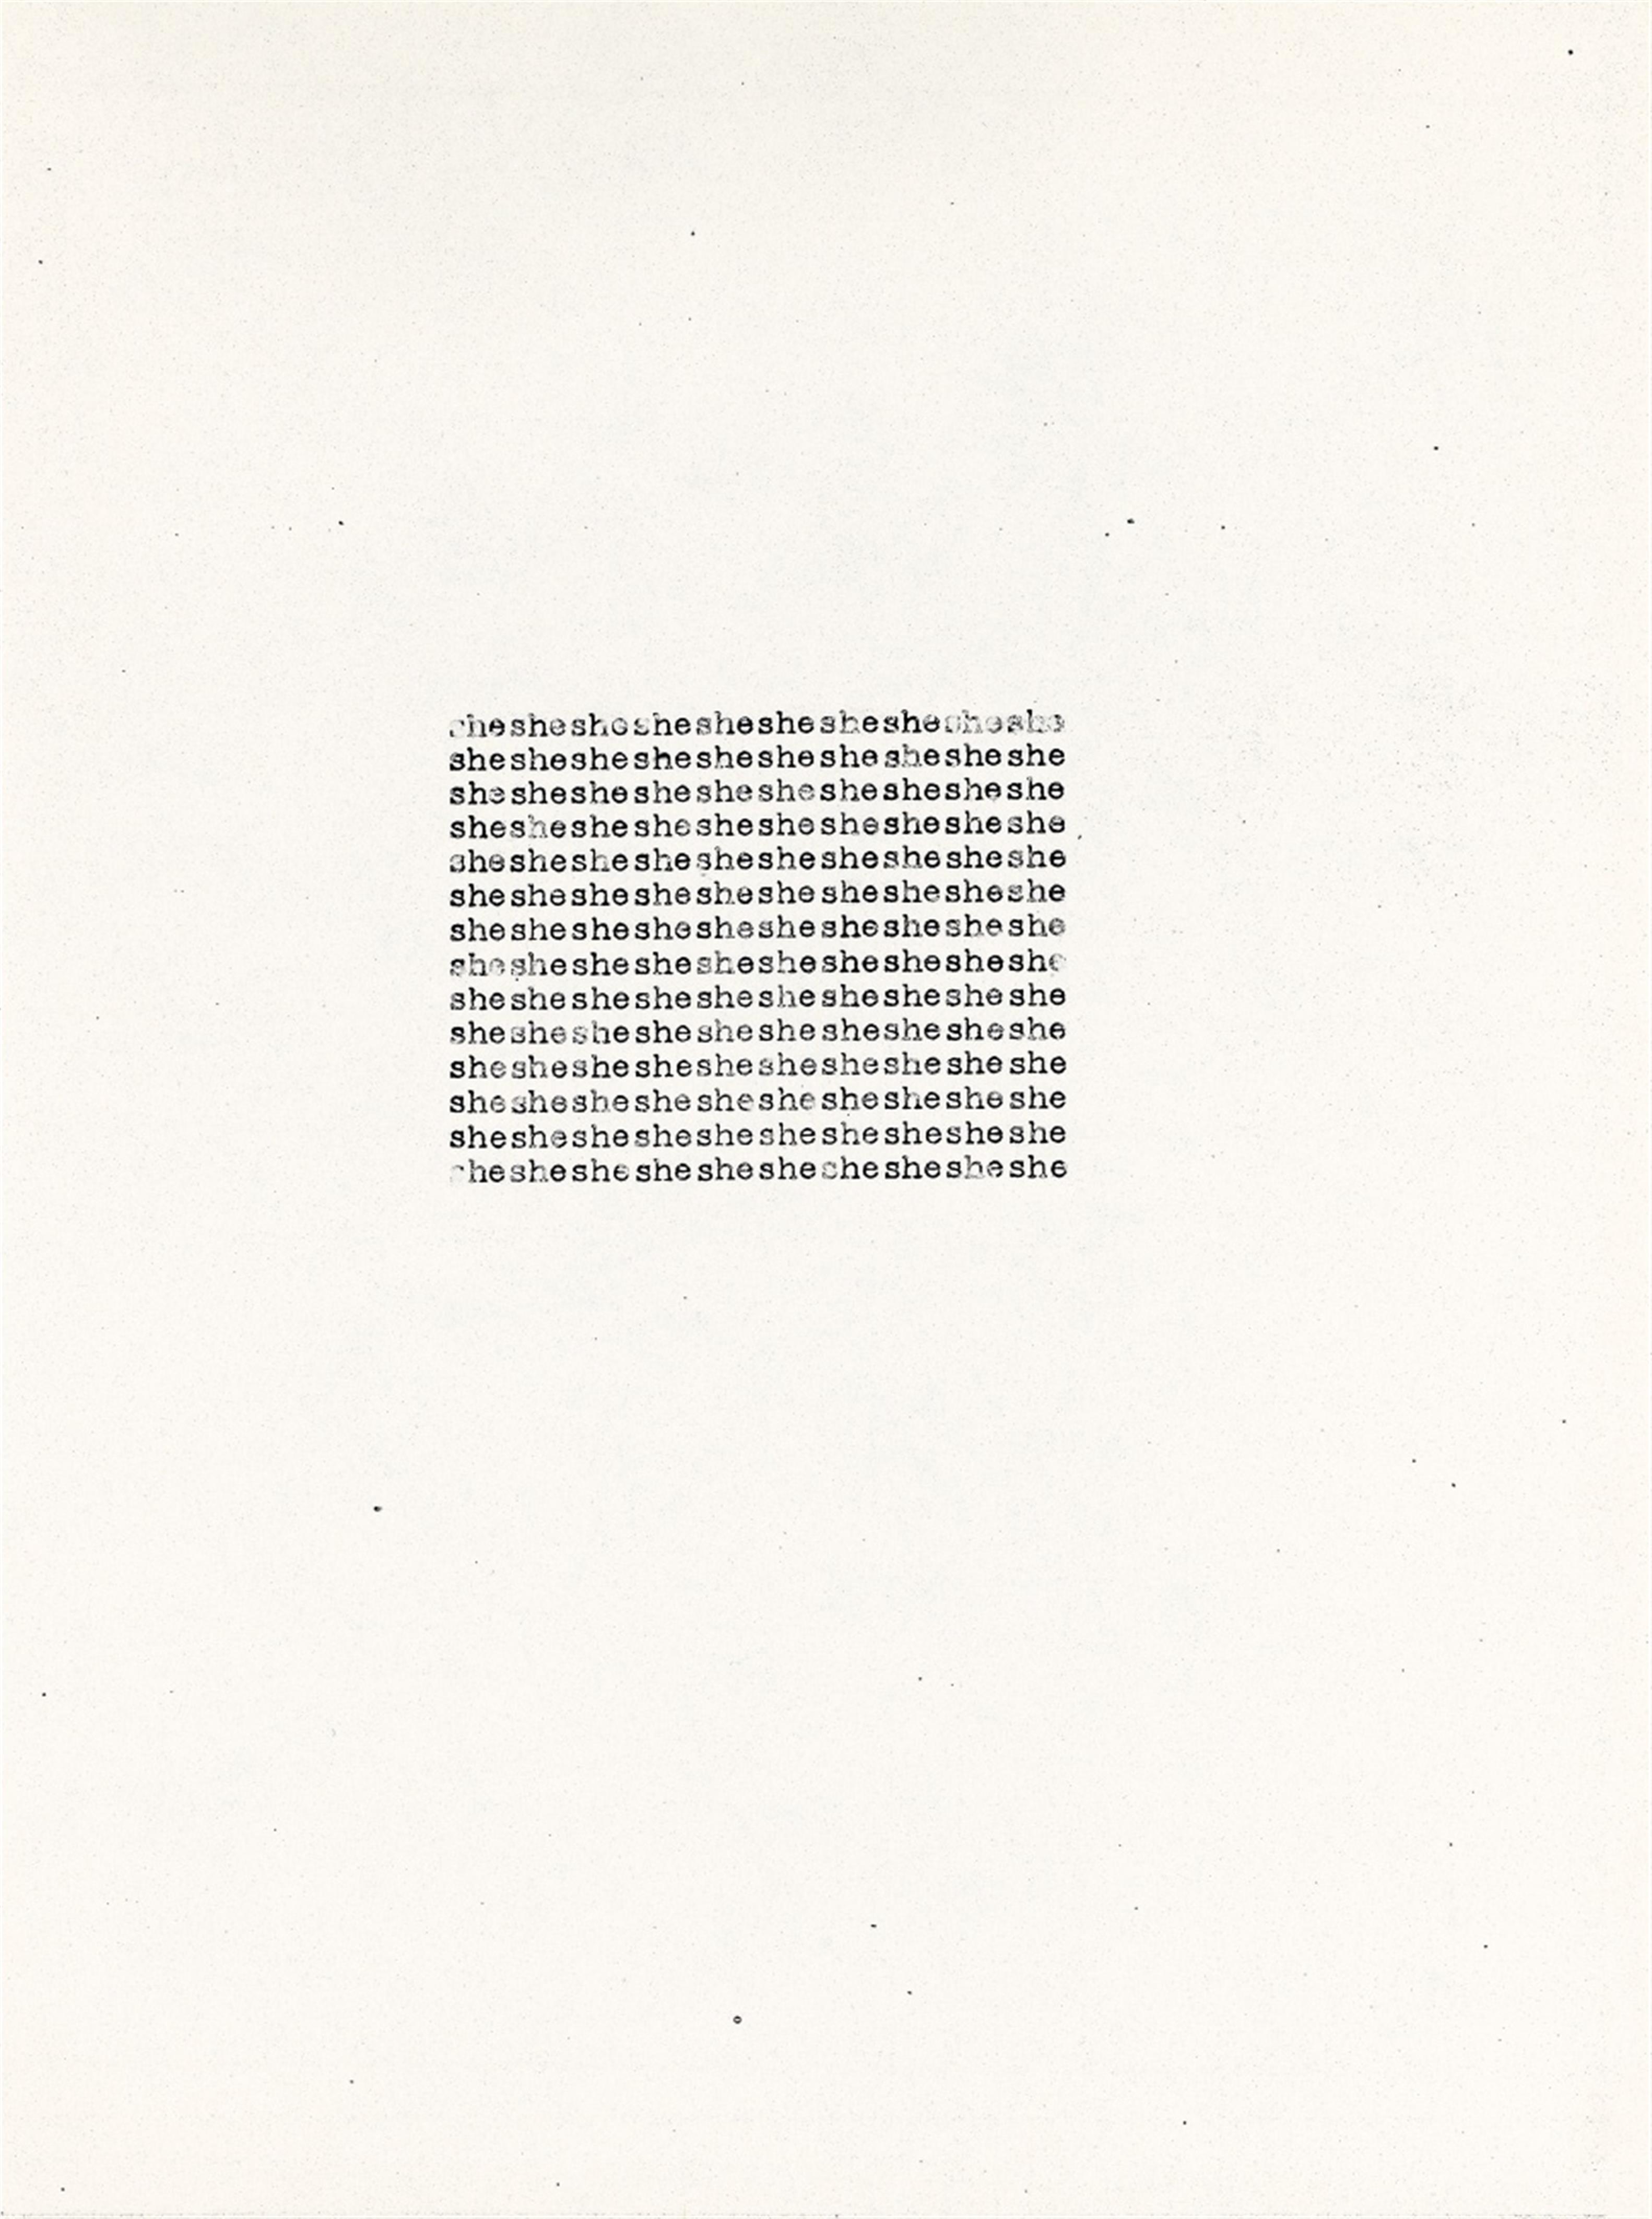 Carl André - flowerflowerflowerflowerflower (From the series: One Hundred Sonnets) - image-1